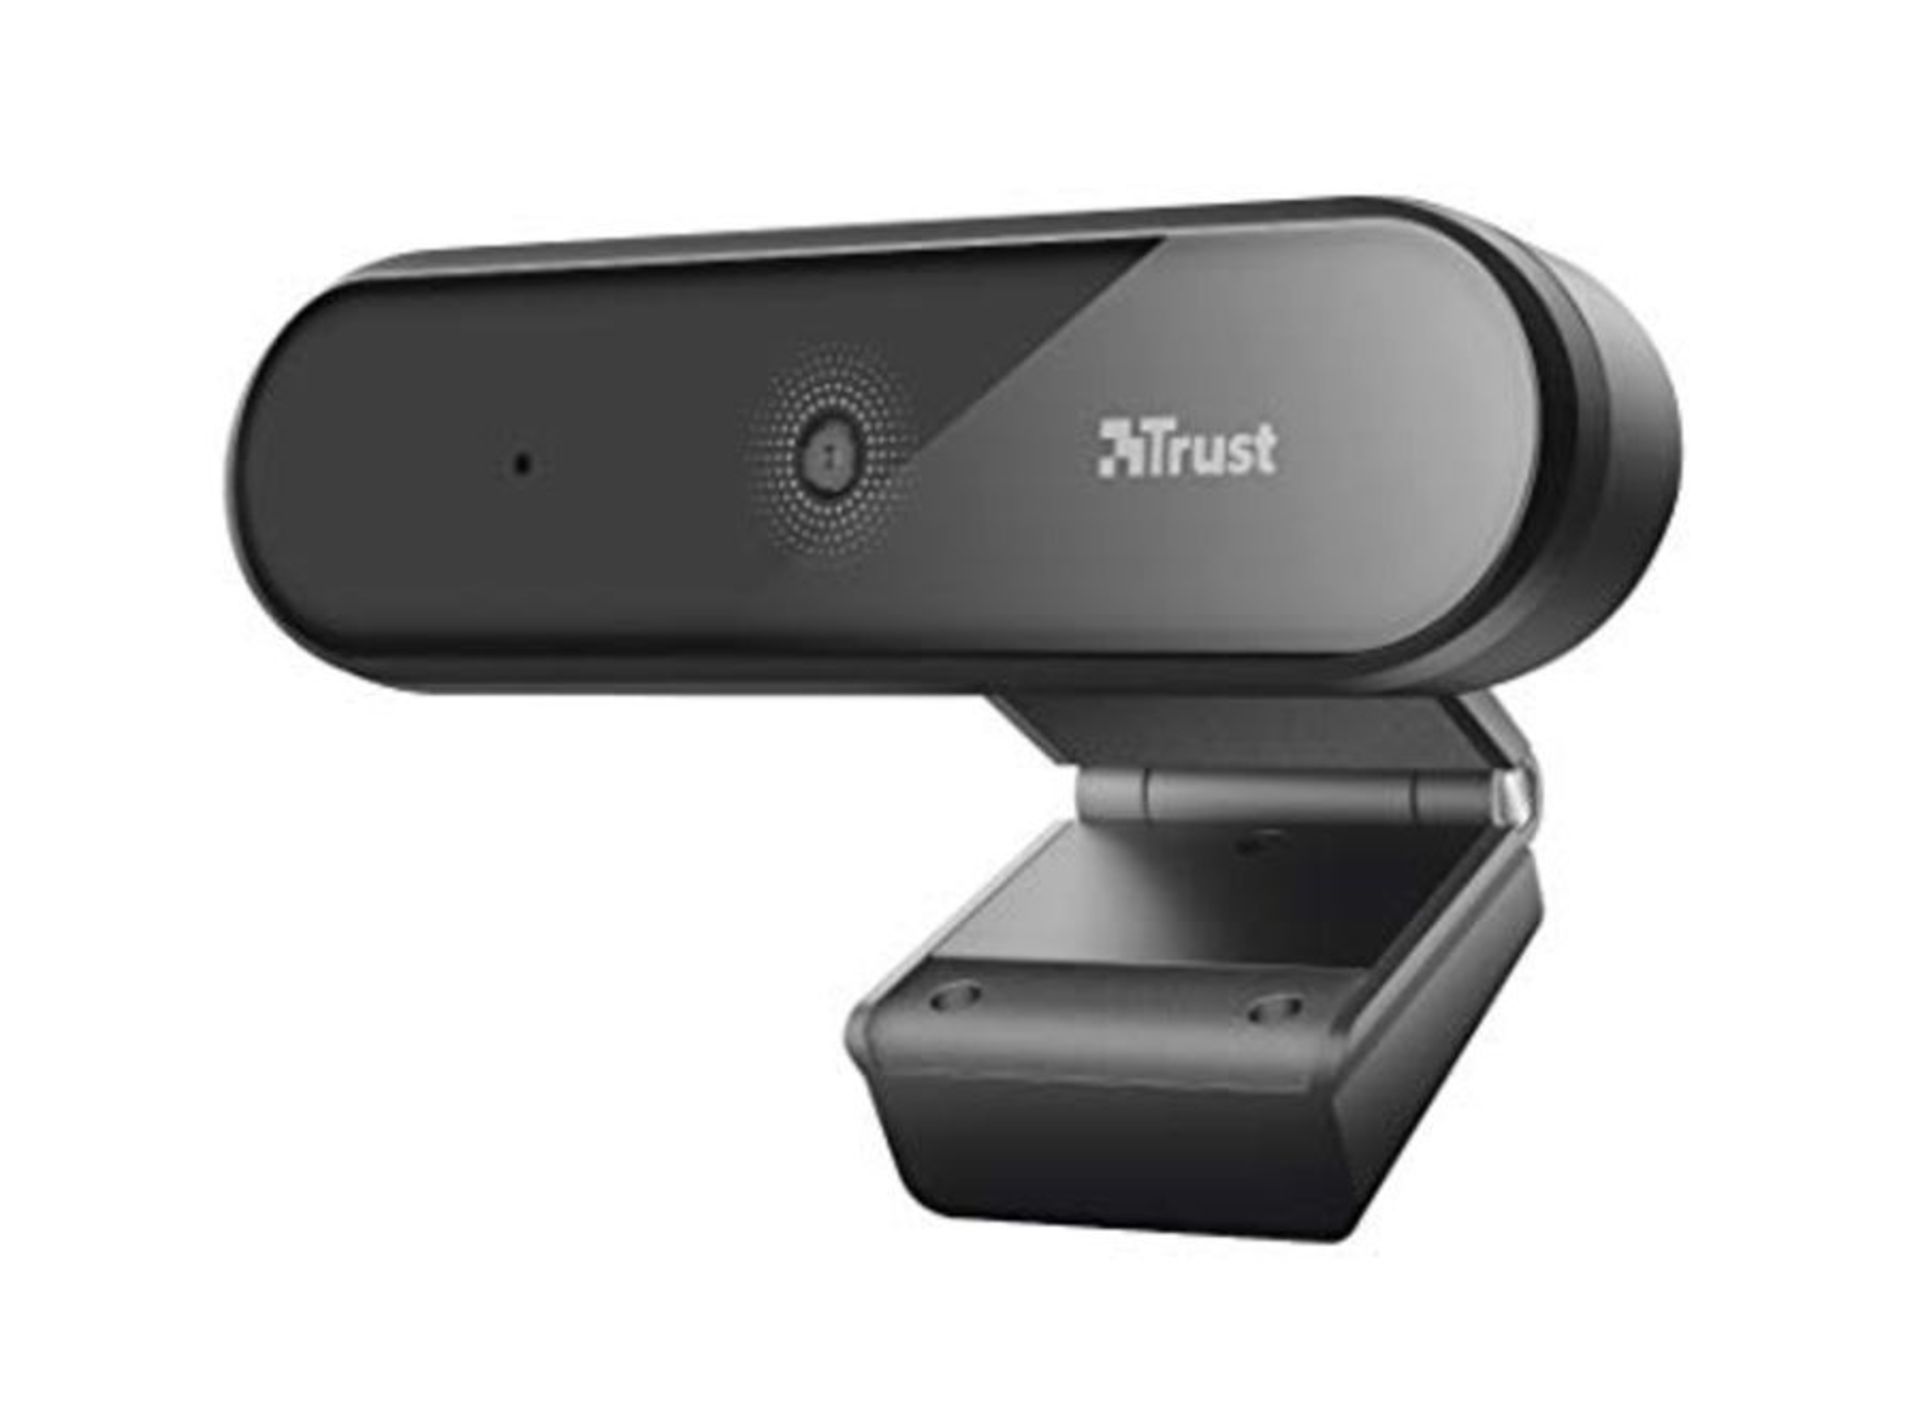 Trust 23637 Tyro Webcam Full HD 1080p with Microphone for PC (Wide Angle, Auto Focus,